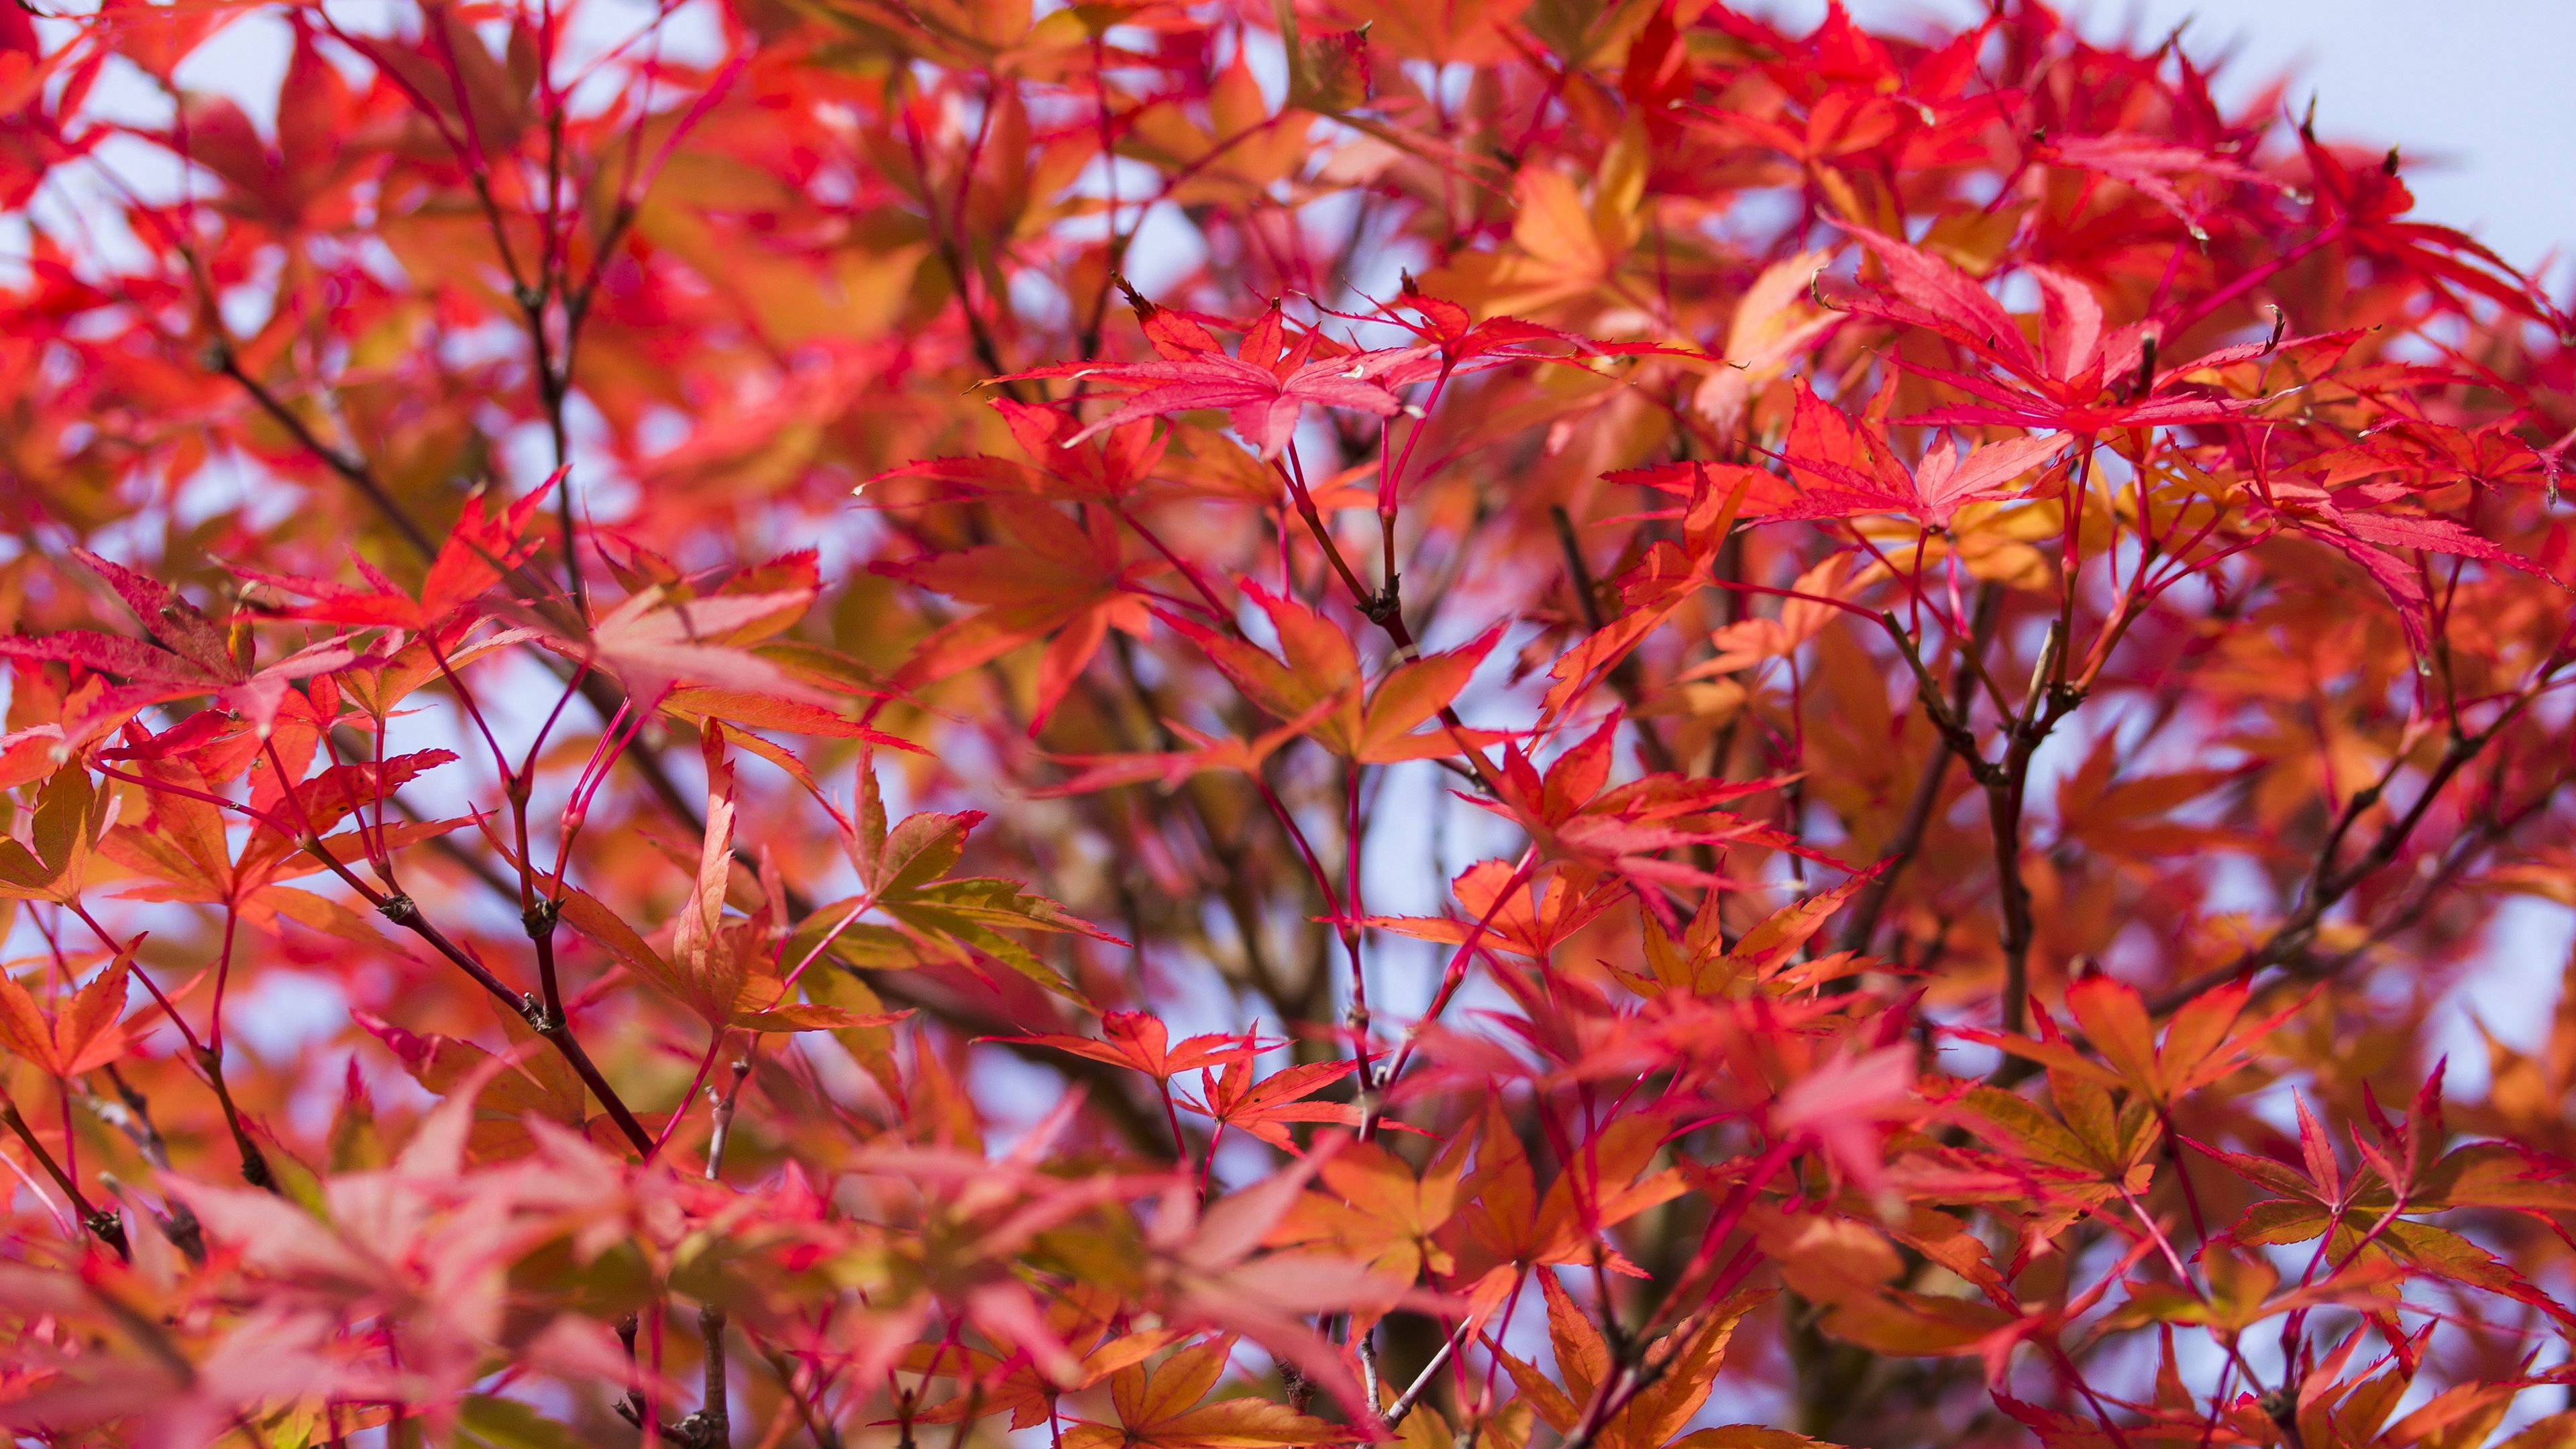 Download wallpaper 3840x2160 leaves, branches, tree 4k uhd 16:9 hd